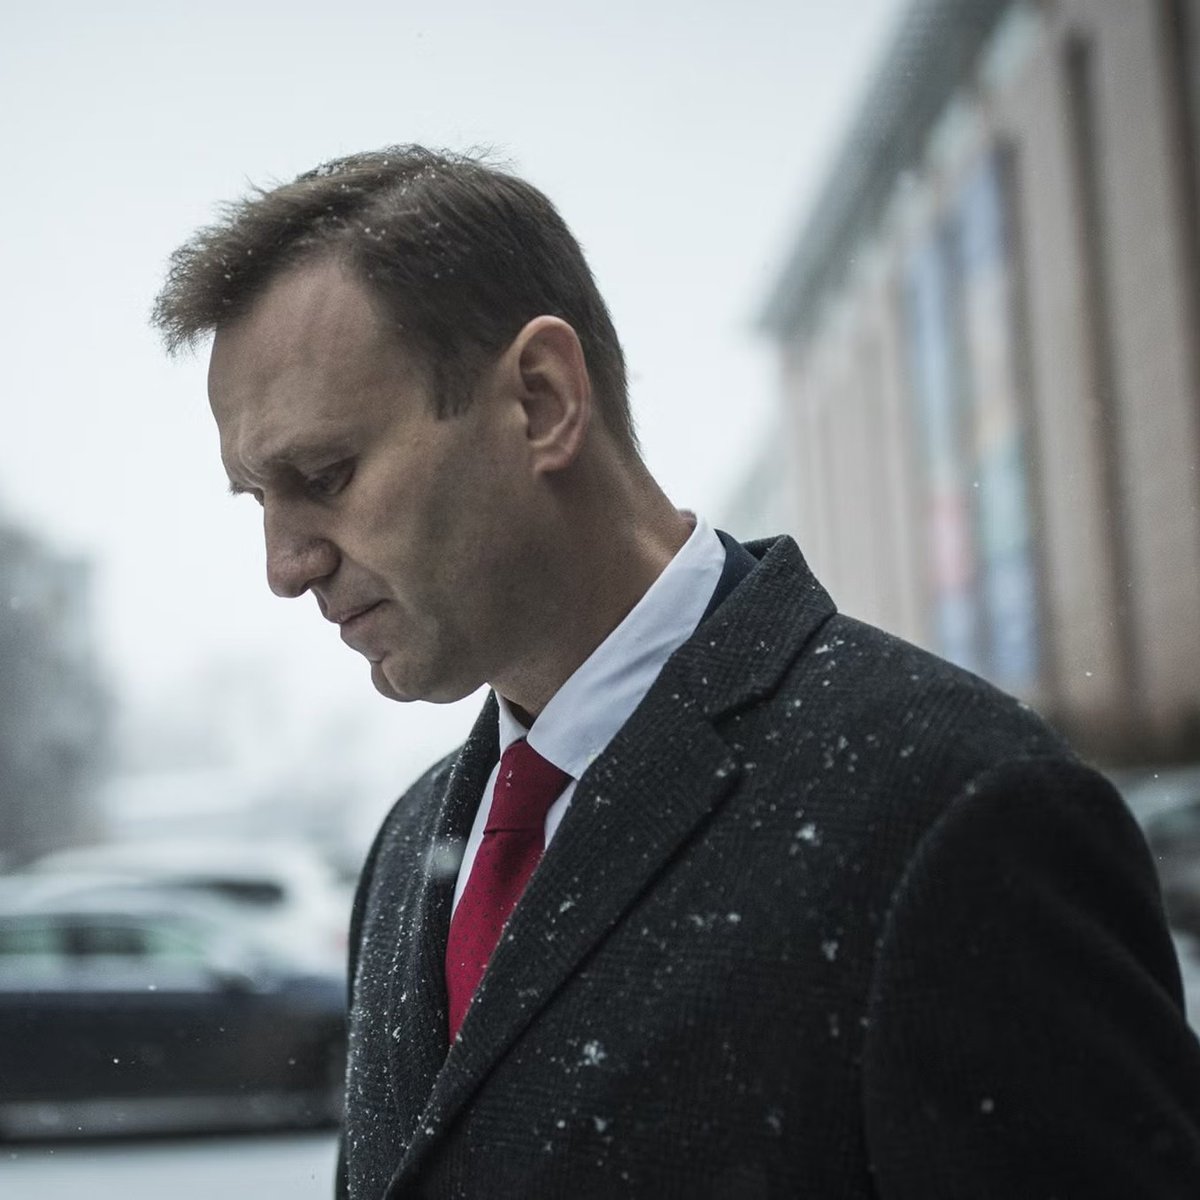 🚨🇺🇸🇷🇺U.S TO PUTIN: WE ADMIT IT, YOU DIDN’T ASSASSINATE NAVALNY A report by U.S intelligence agencies, including the CIA, has concluded that Putin didn’t order the death of Alexei Navalny at a prison camp in February. The report still holds Putin “culpable” for his death due to…